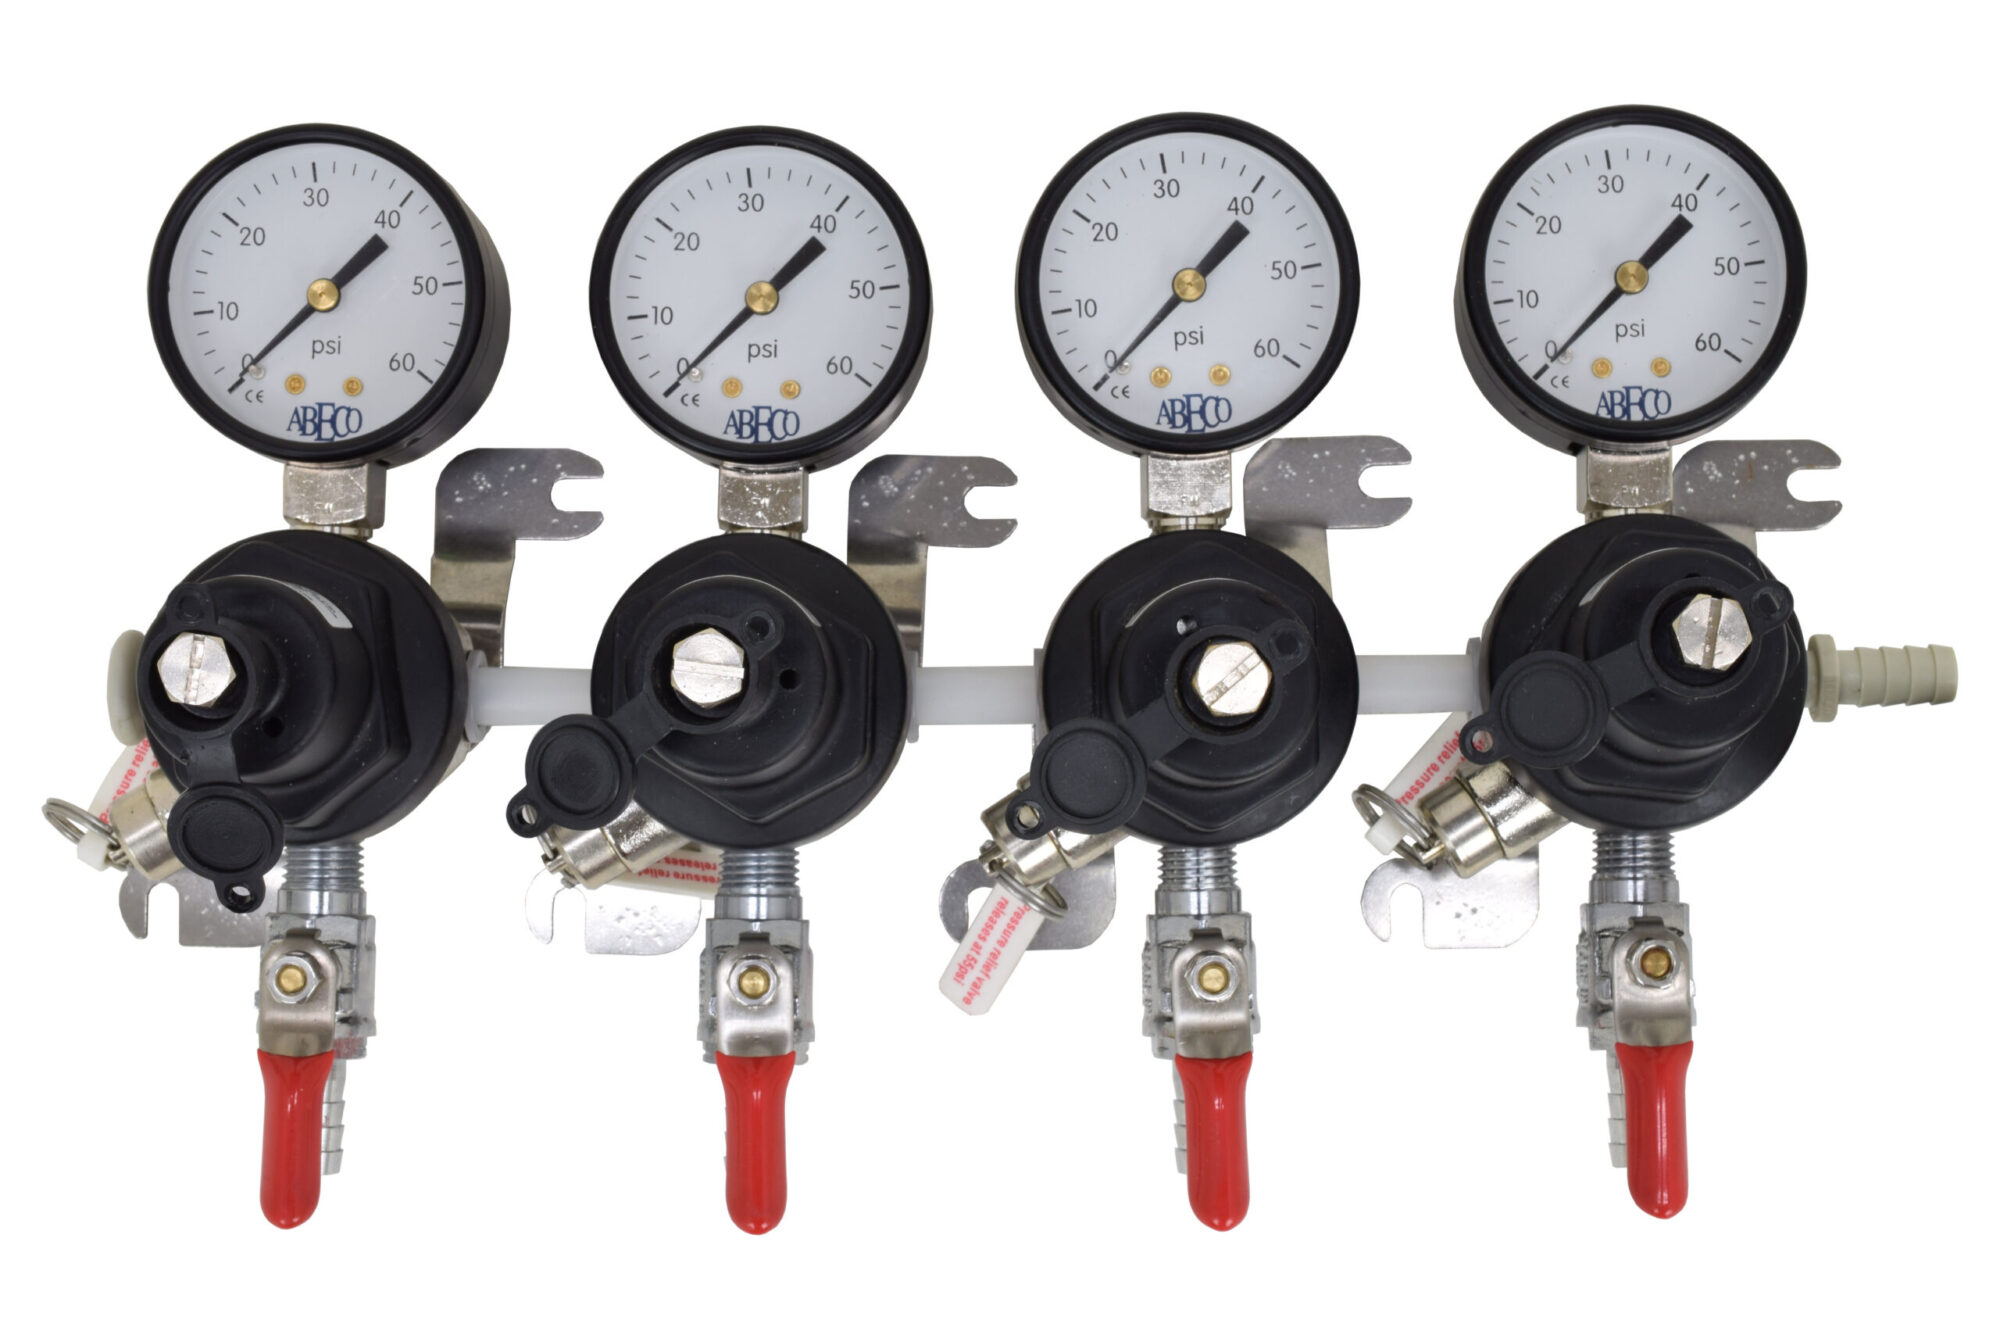 2704 Four TecFlo Secondary Regulator With Your Choice of Push In Fittings and 3/8" OD Poly Unions